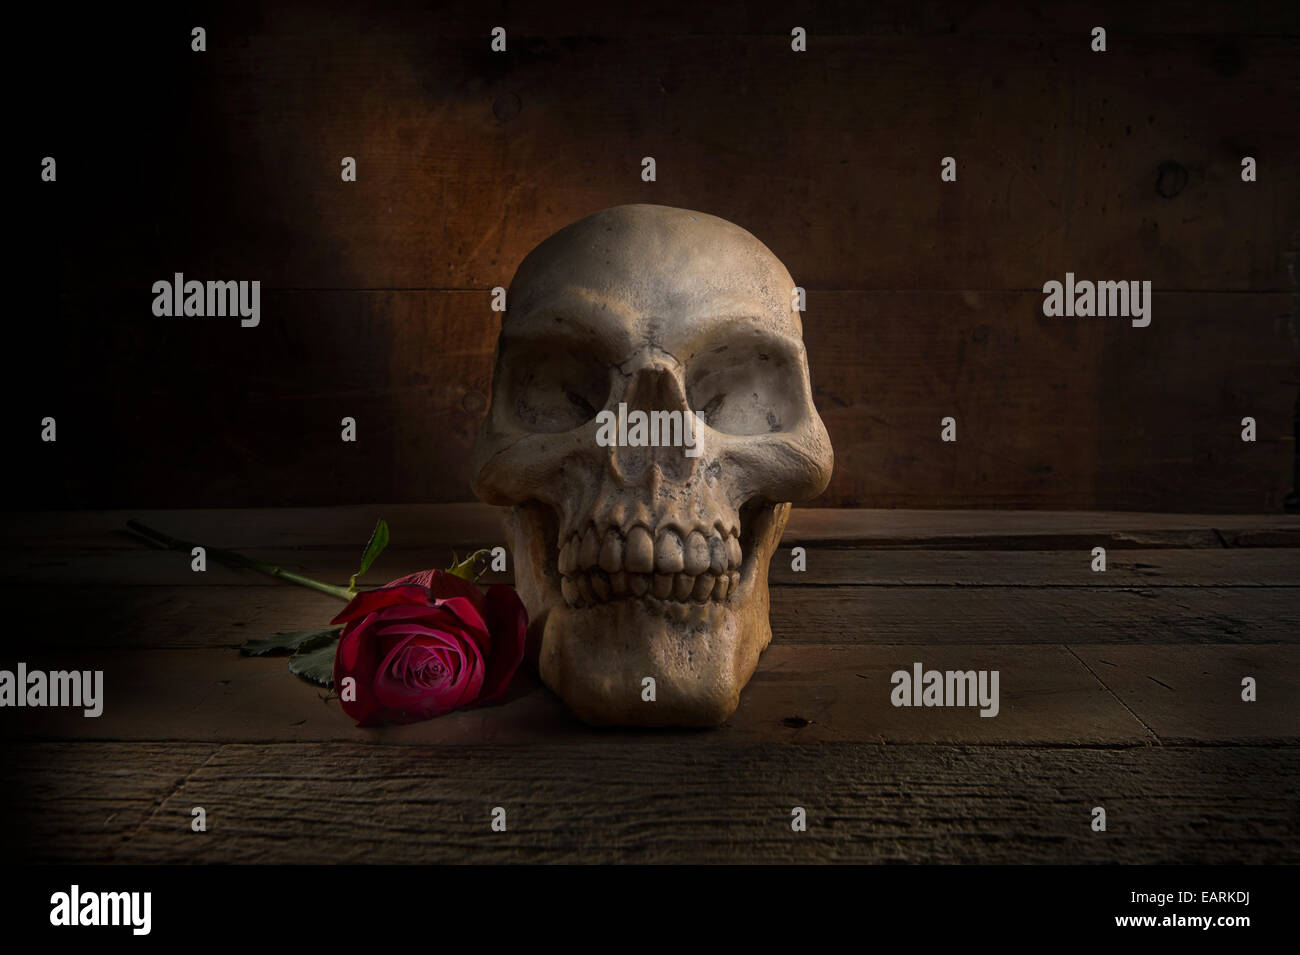 Skull With Red Rose: Day Of The Dead Stock Photo